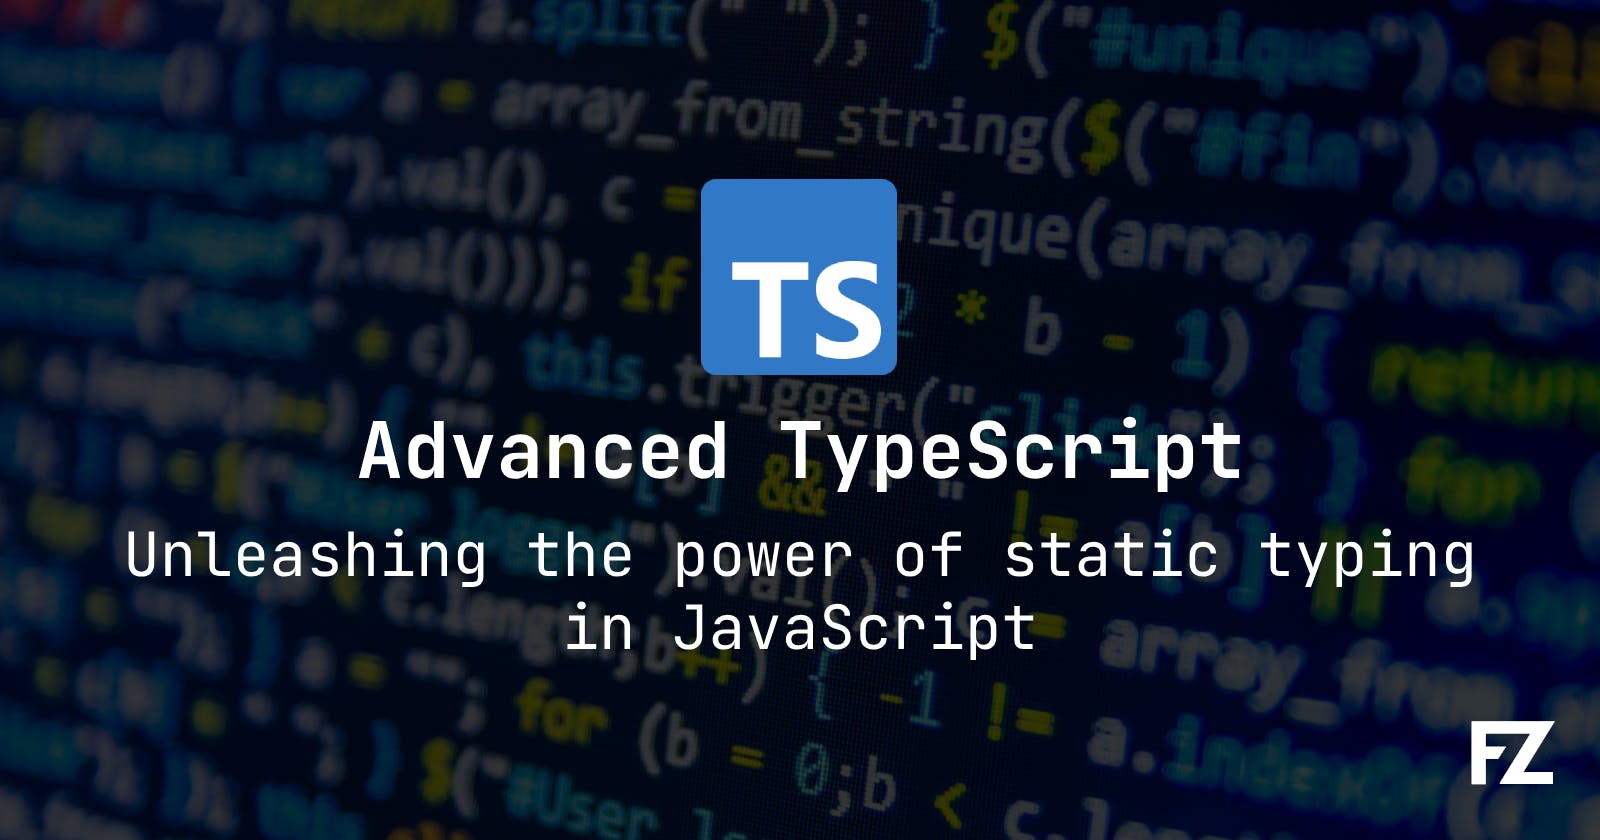 Advanced TypeScript: Unleashing the Power of Static Typing in JavaScript